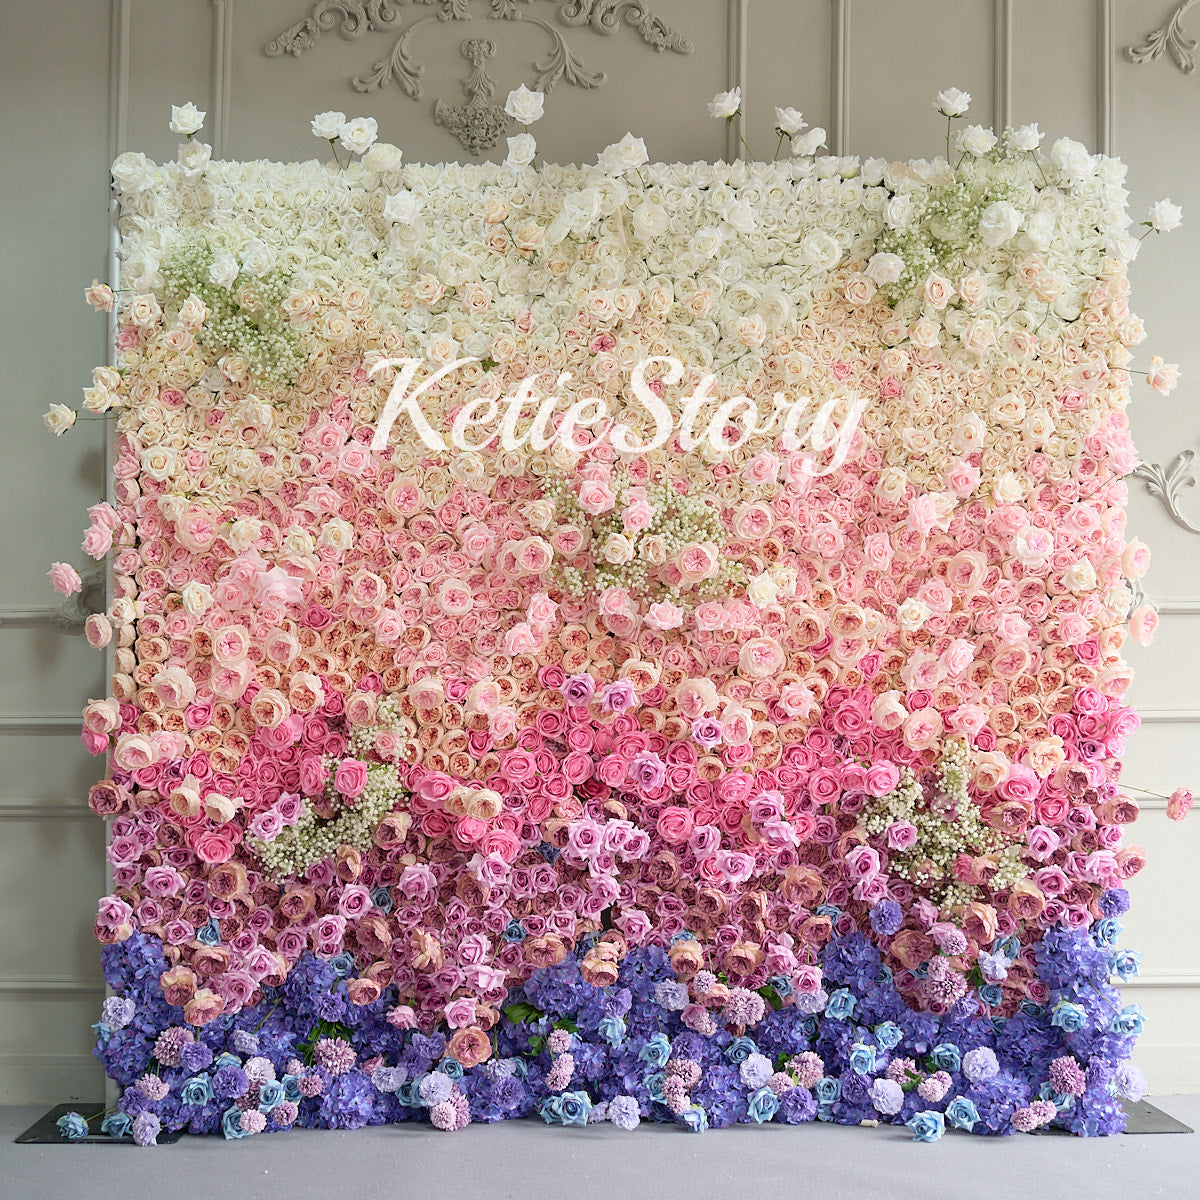 The rainbow fabric flower wall presents a gentle and romantic atmosphere.